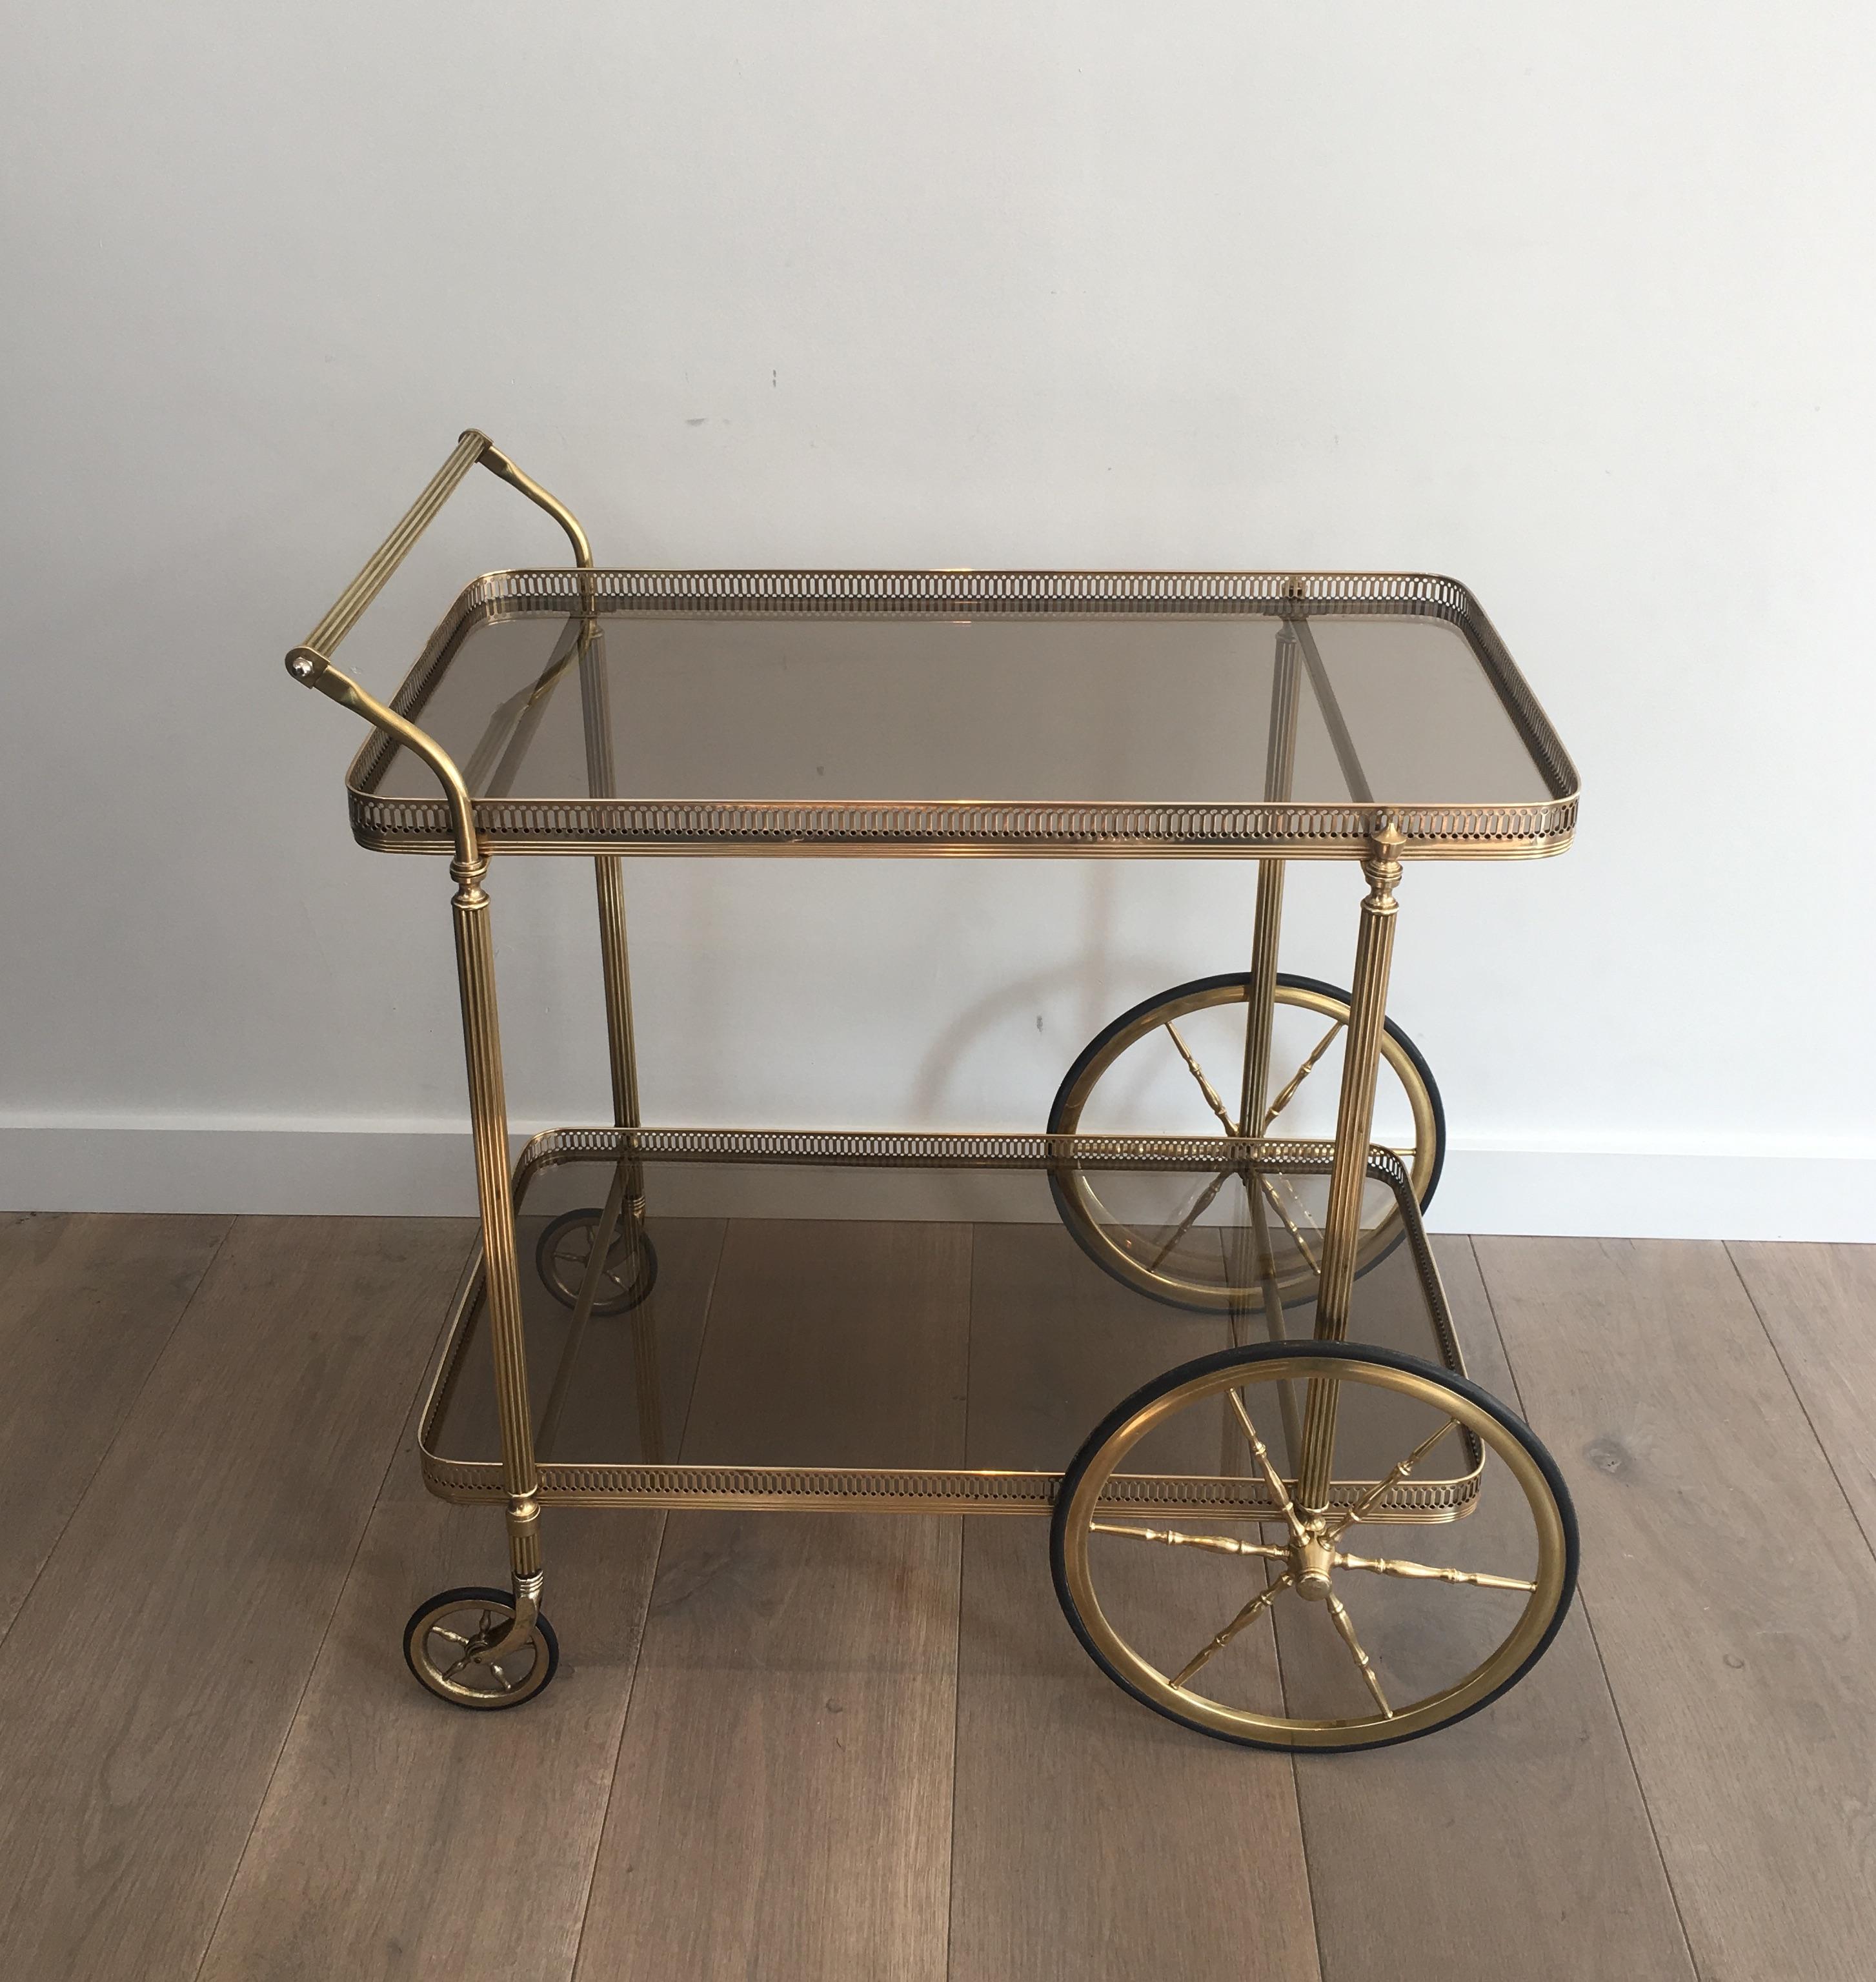 This neoclassical style brass bar cart is made of brass with smoked glass shelves. This is a French work in the style of famous French designer Maison Jansen, circa 1940.